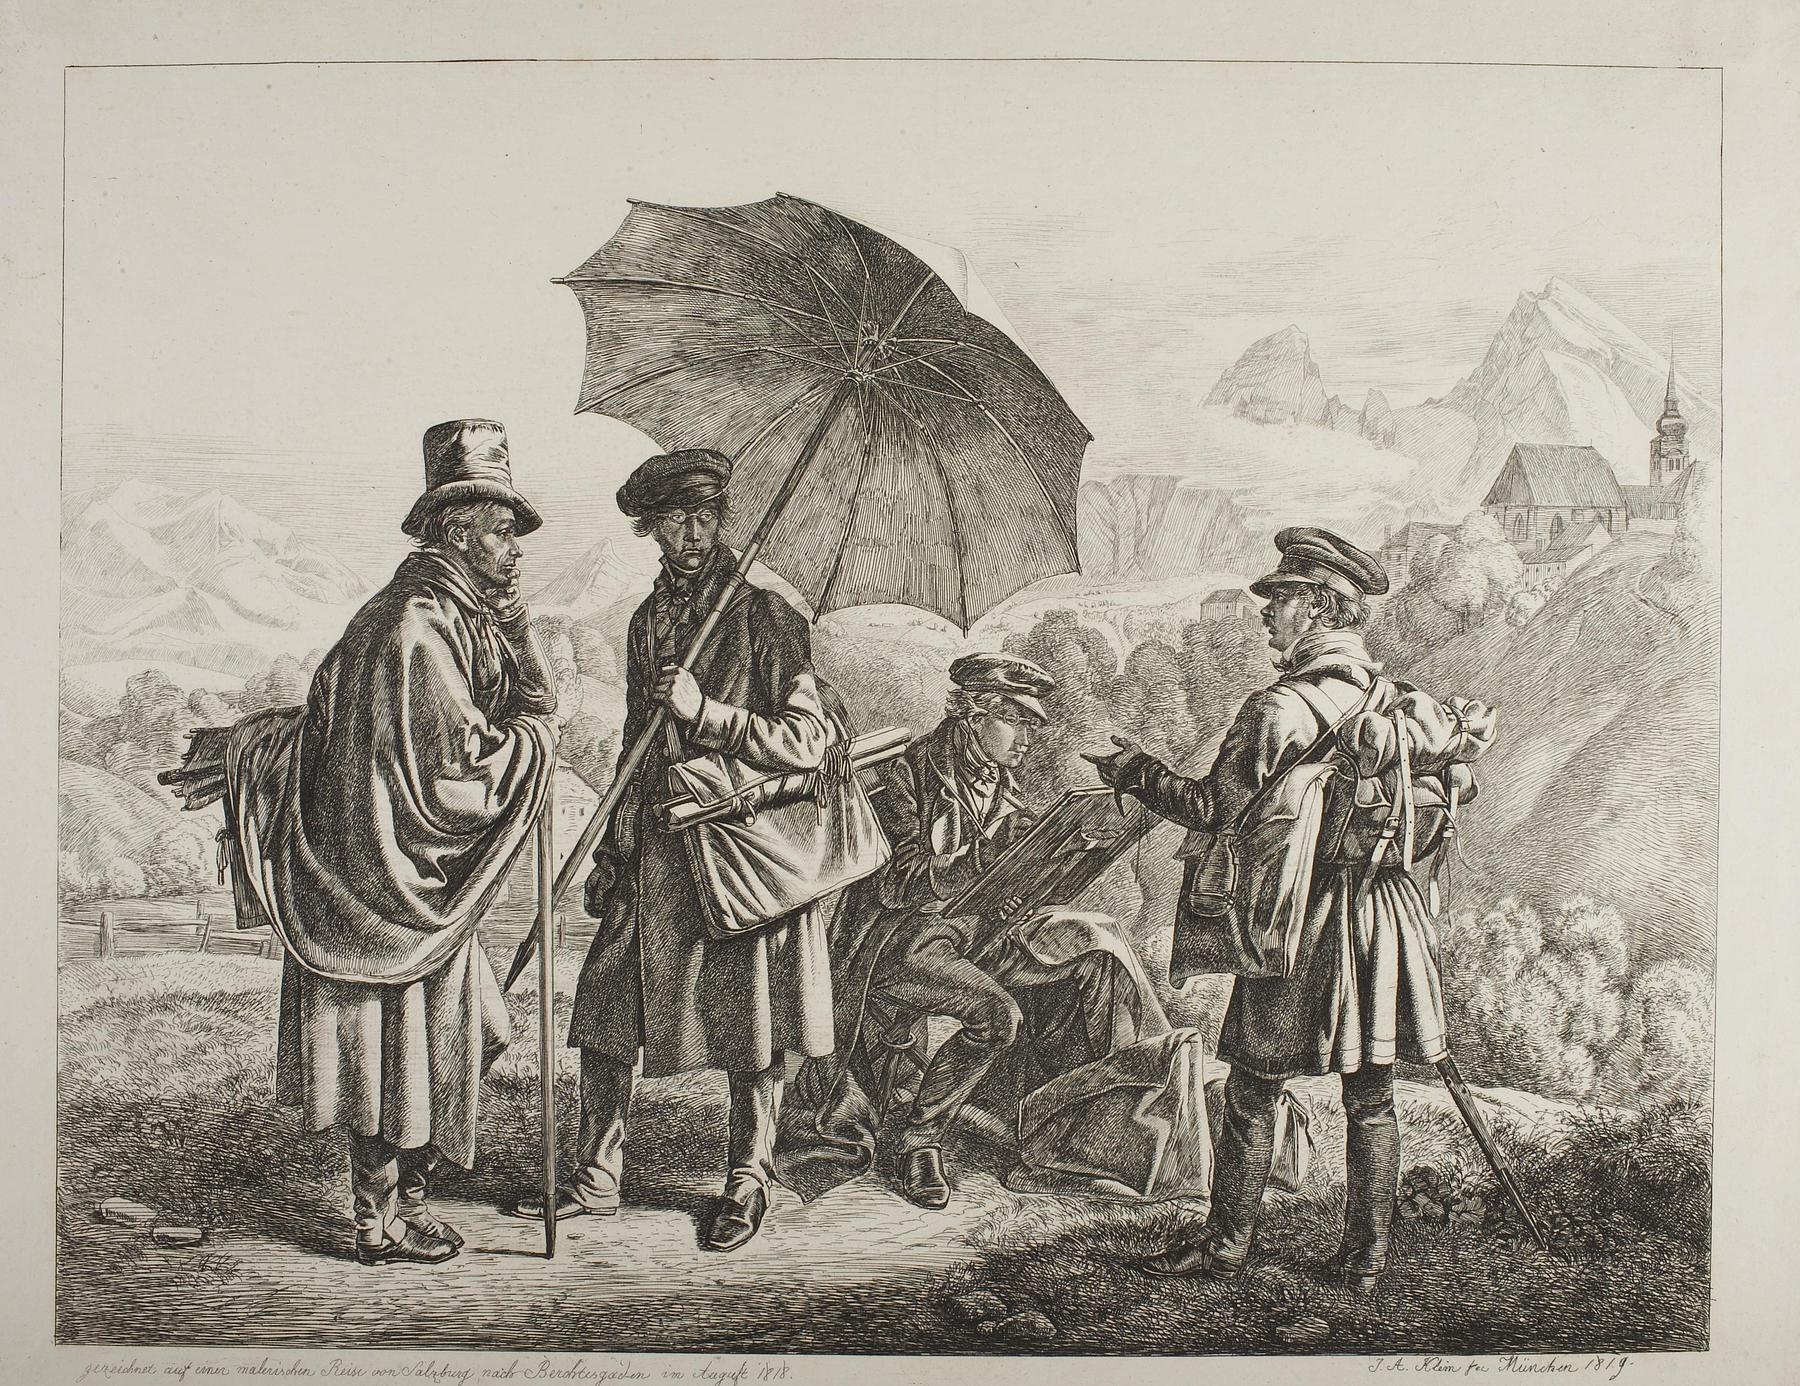 Ernst Welker, Johann Christoph Erhard and the brothers Heinrich and Friedrich Philipp Reinhold on a picturesque journey from Salzburg to Berchtesgaden in August 1818, E722